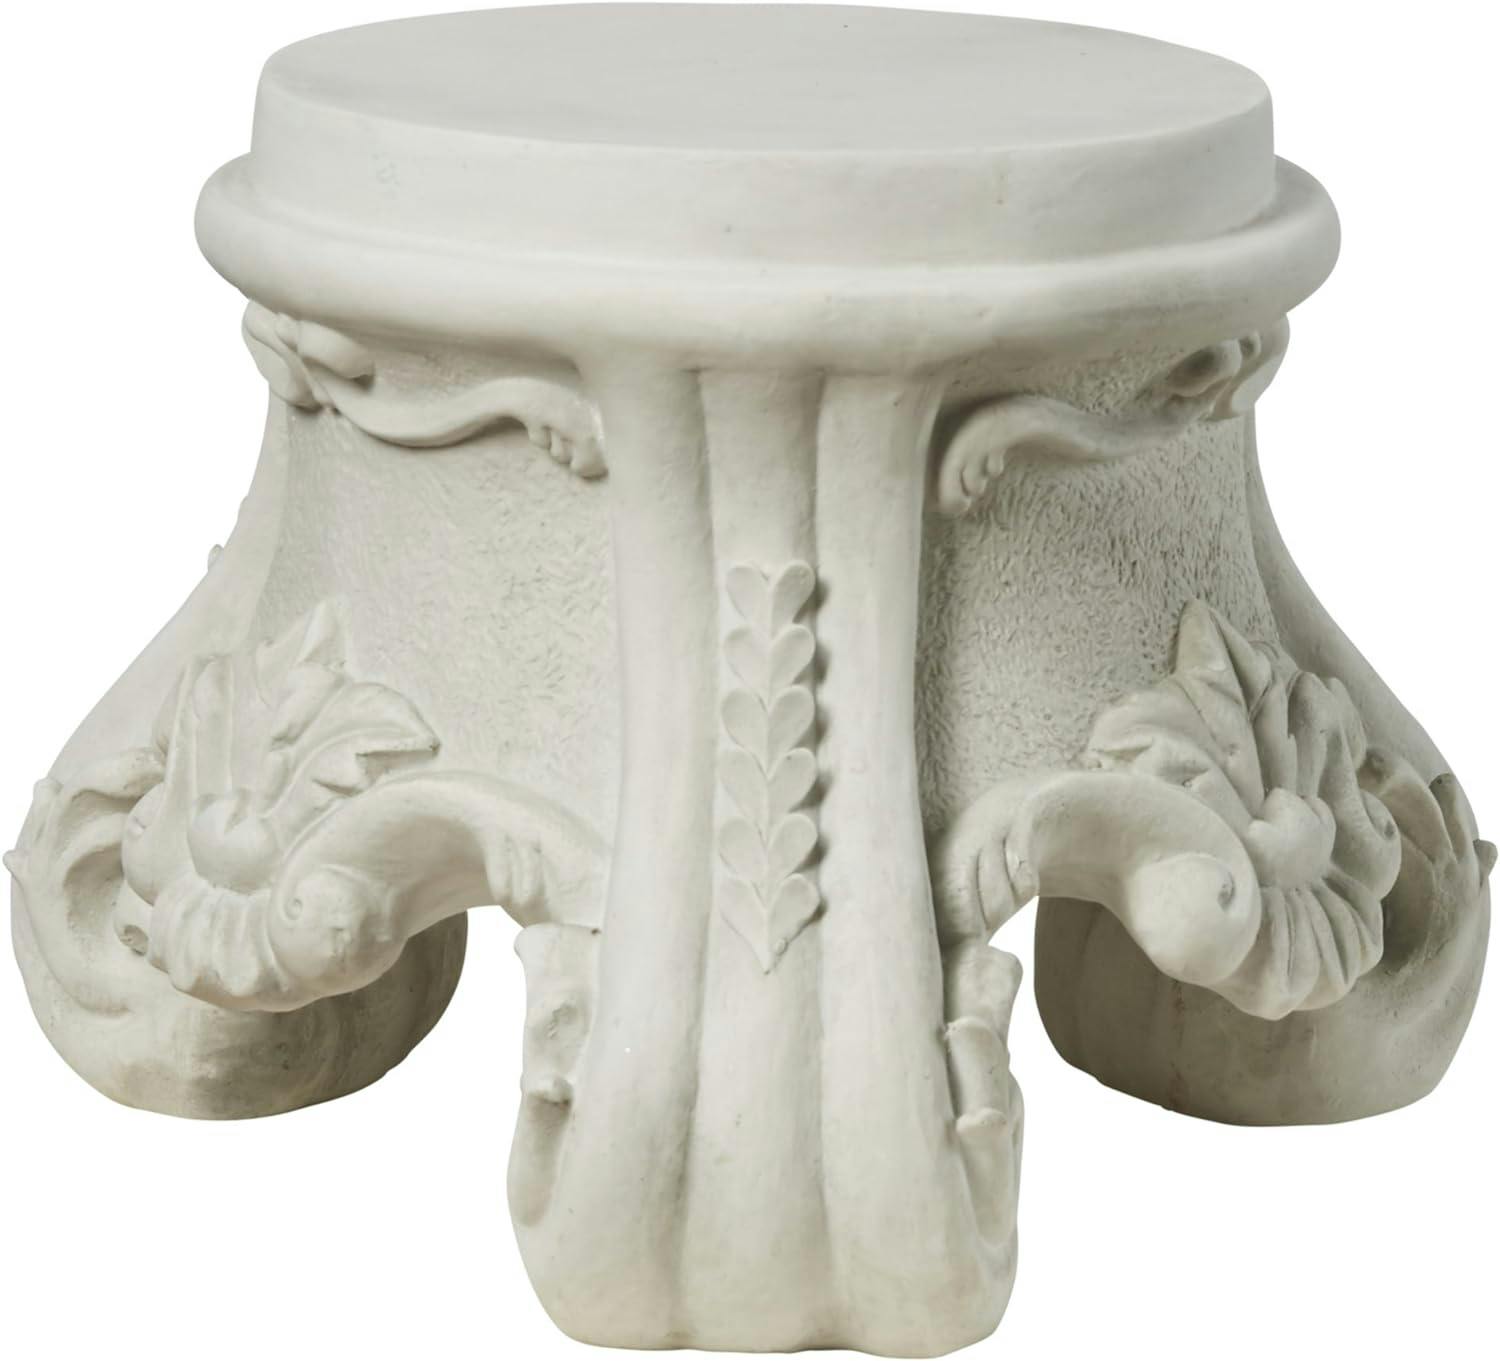 Rococo-Inspired Faux Stone Finish Sculptural Pedestal